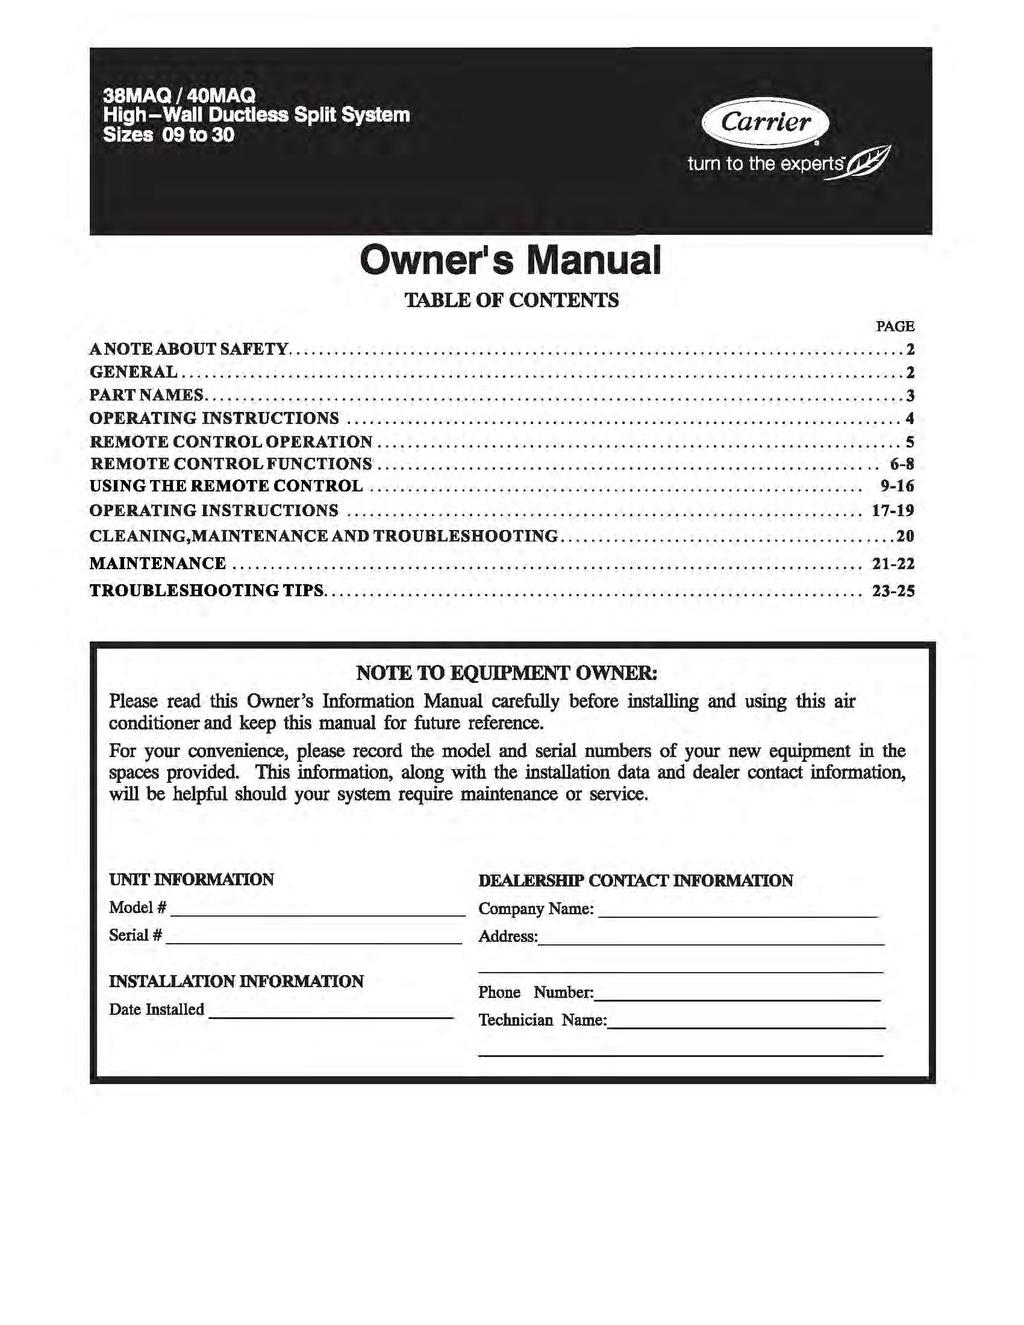 Owner s Manual TABLE OF CONTENTS PAGE A NOTE ABOUT SAFETY... 2 GENERAL... 2 PART NAMES... 3 OPERATING INSTRUCTIONS... 4 REMOTE CONTROL OPERATION... 5 REMOTE CONTROL FUNCTIONS.